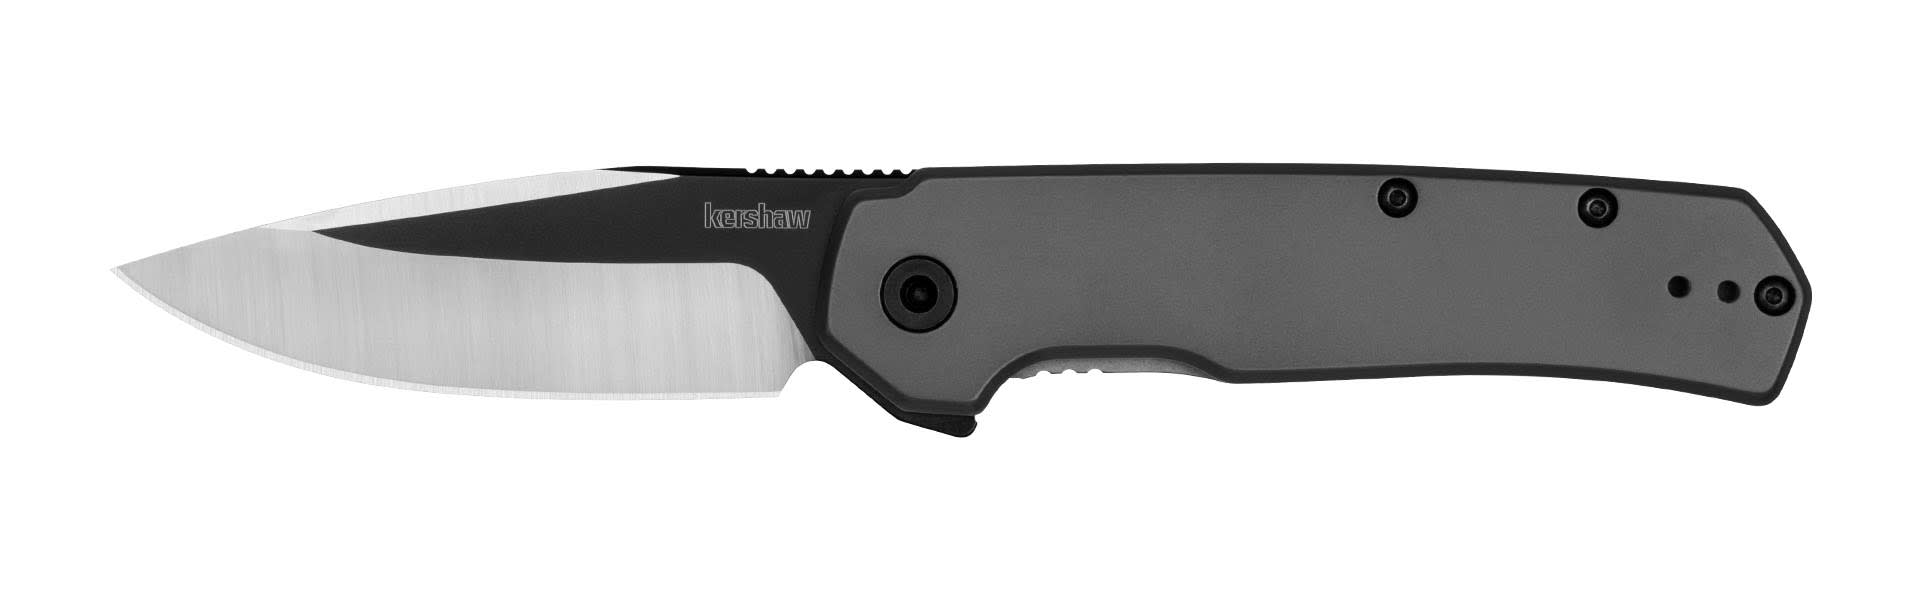 Kershaw® Thermal Assisted Blade Folding Knife